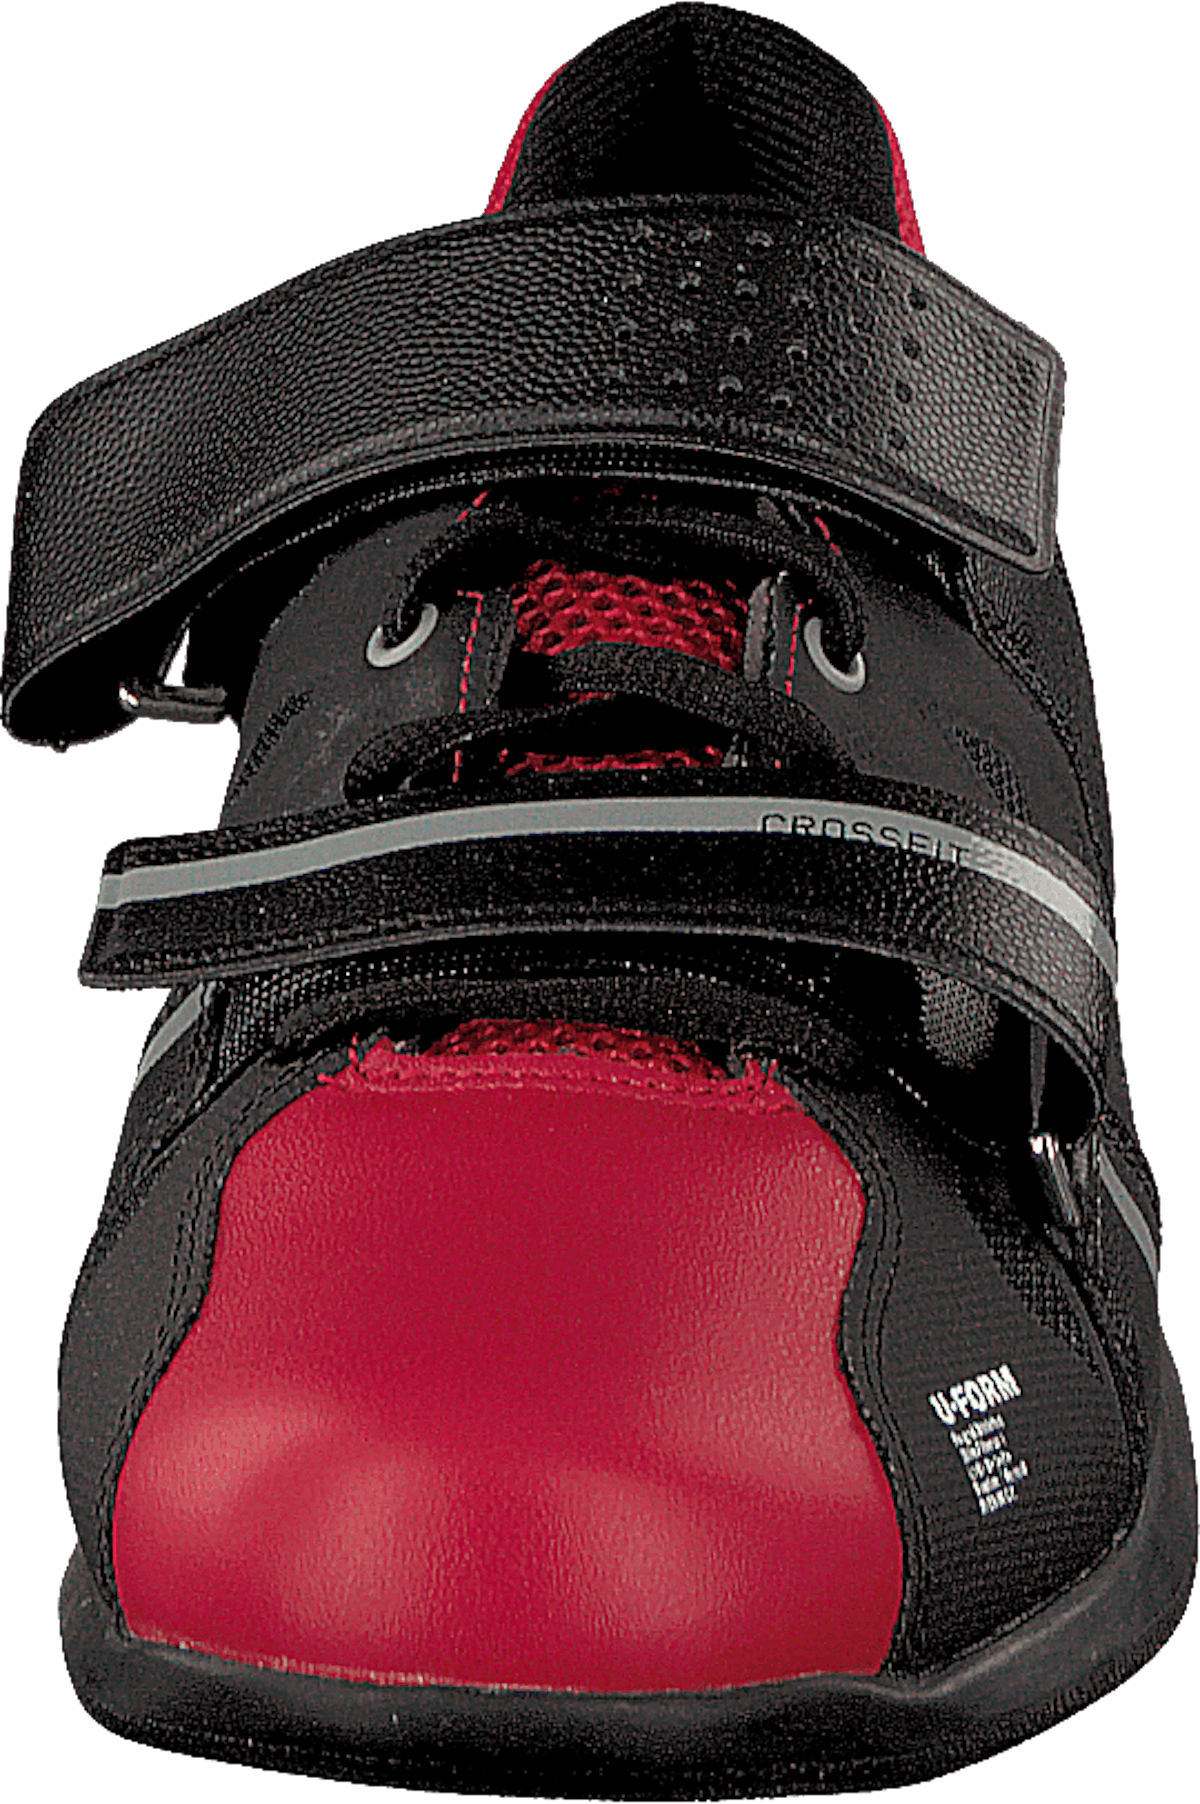 R Crossfit Lifter Plus2.0 Black/Excellent Red/Flat Grey